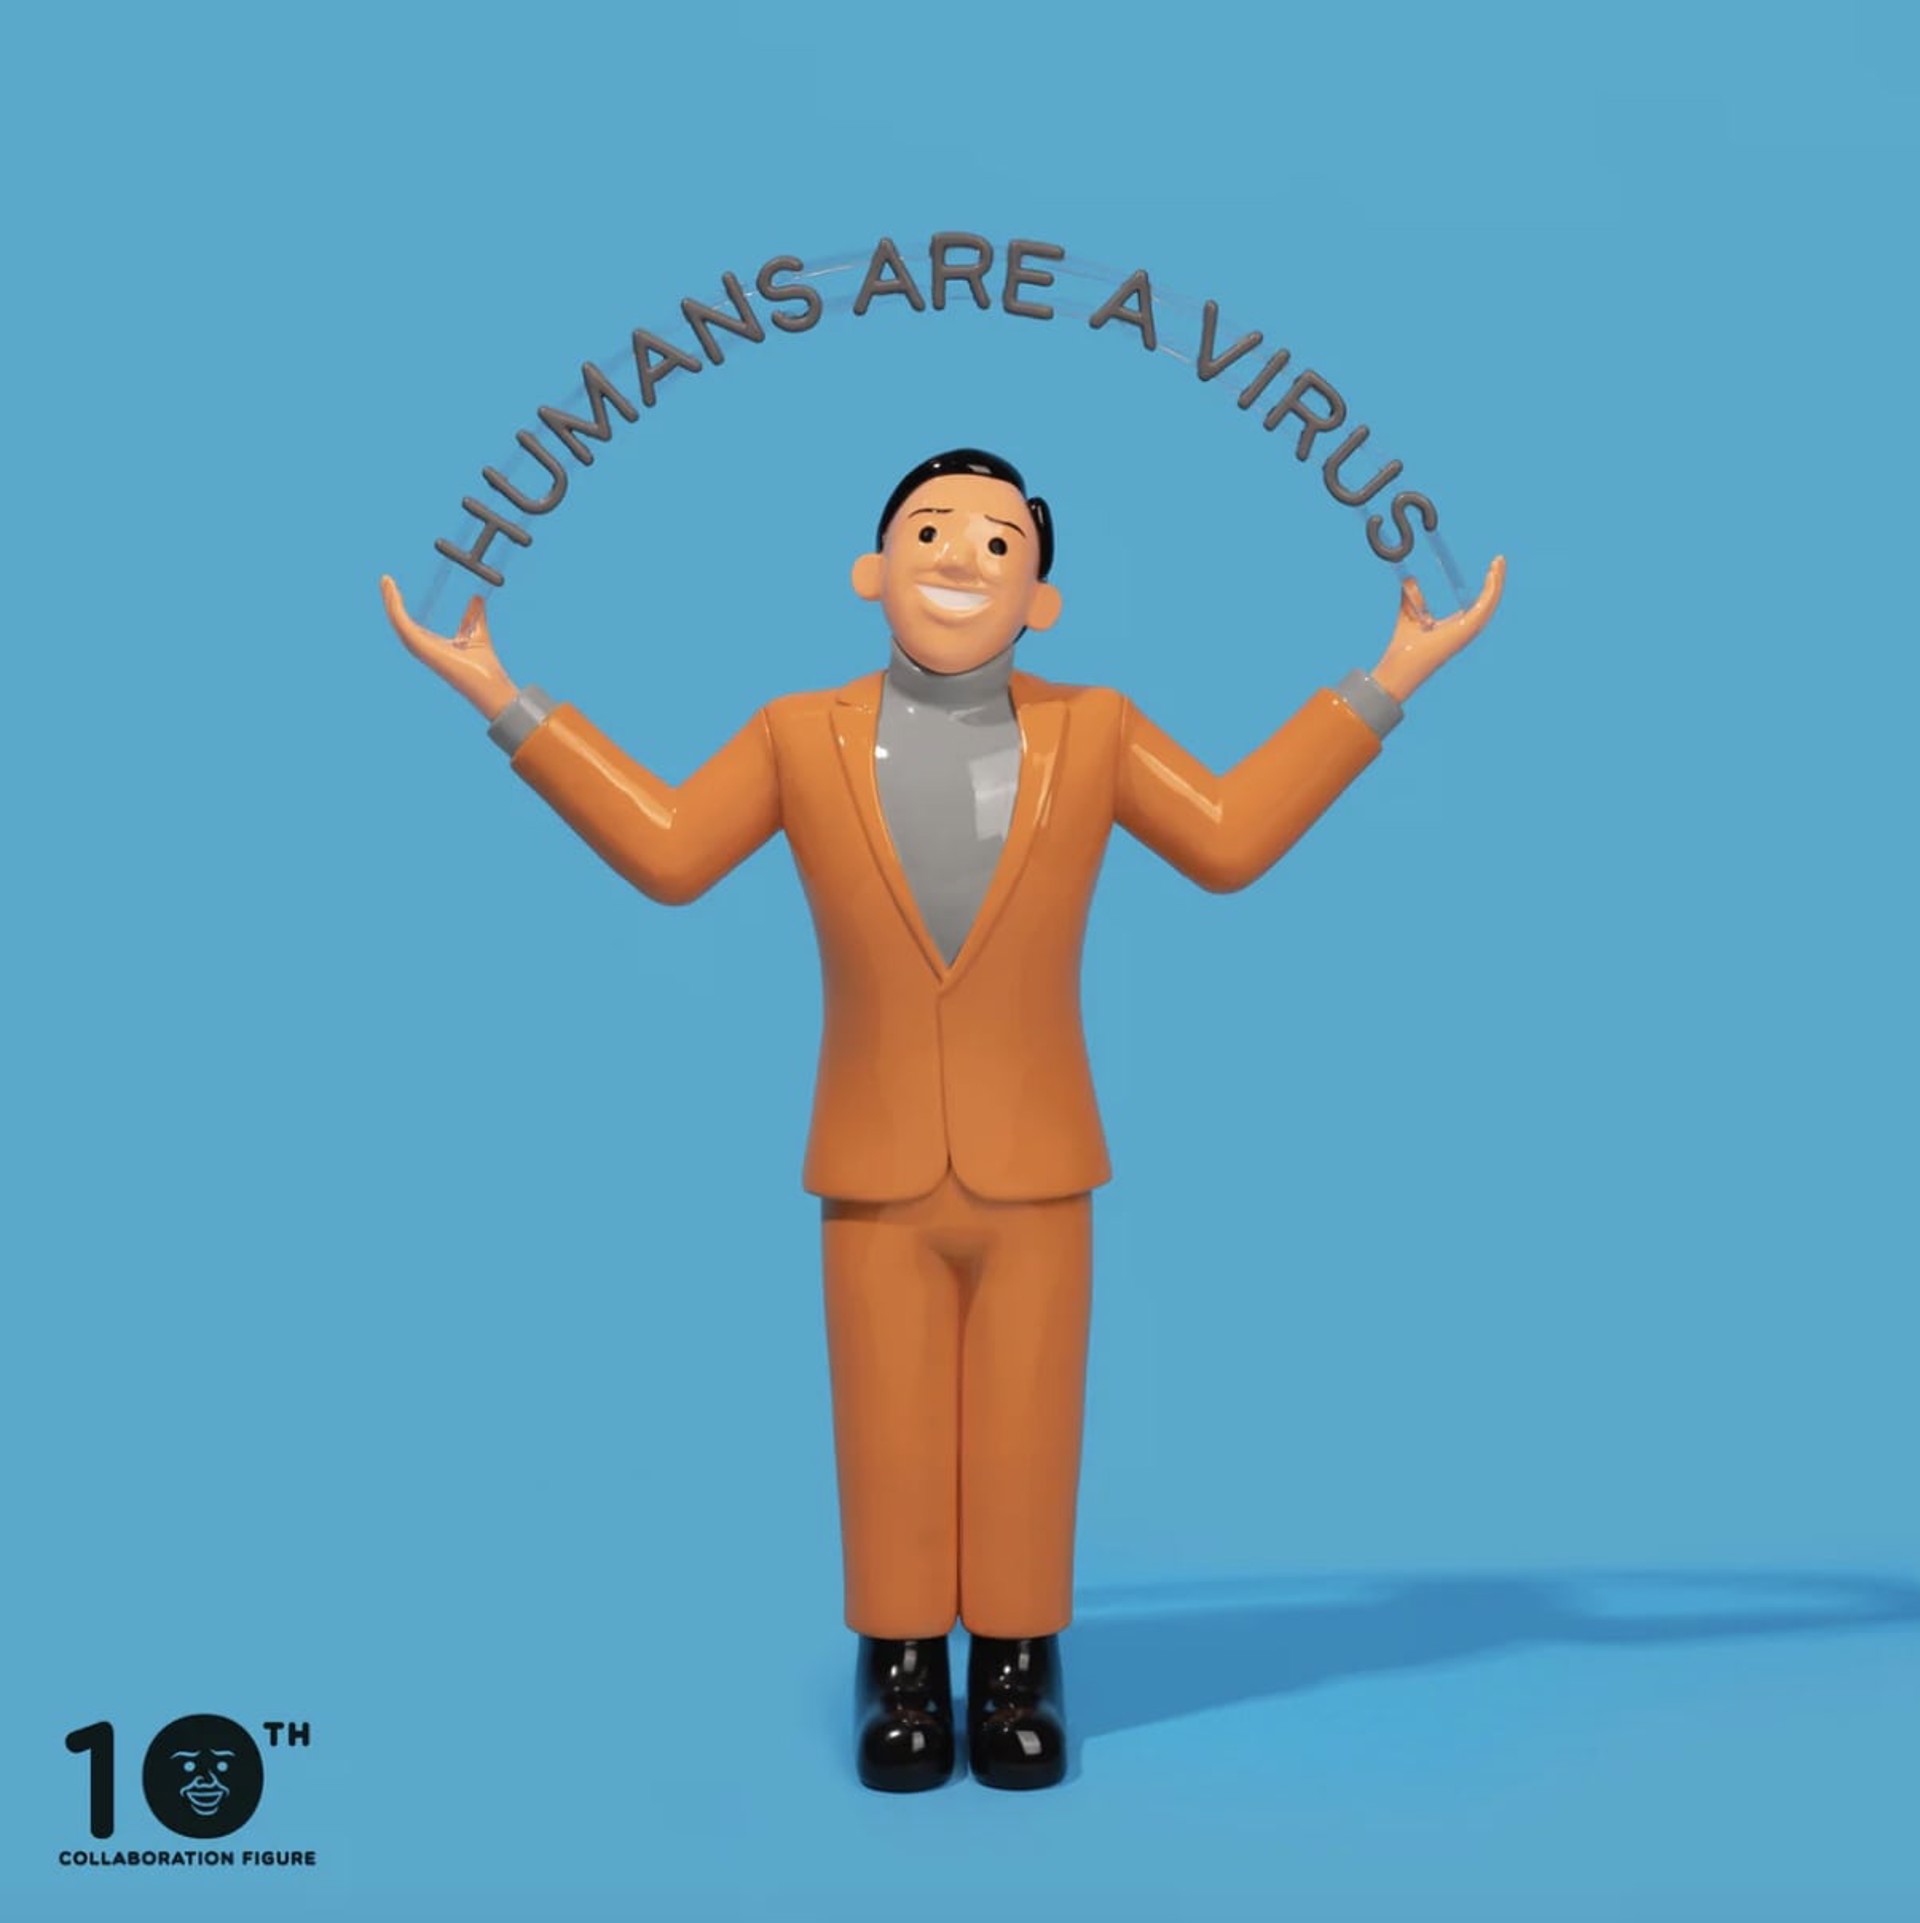 Humans Are A Virus by Joan Cornellà